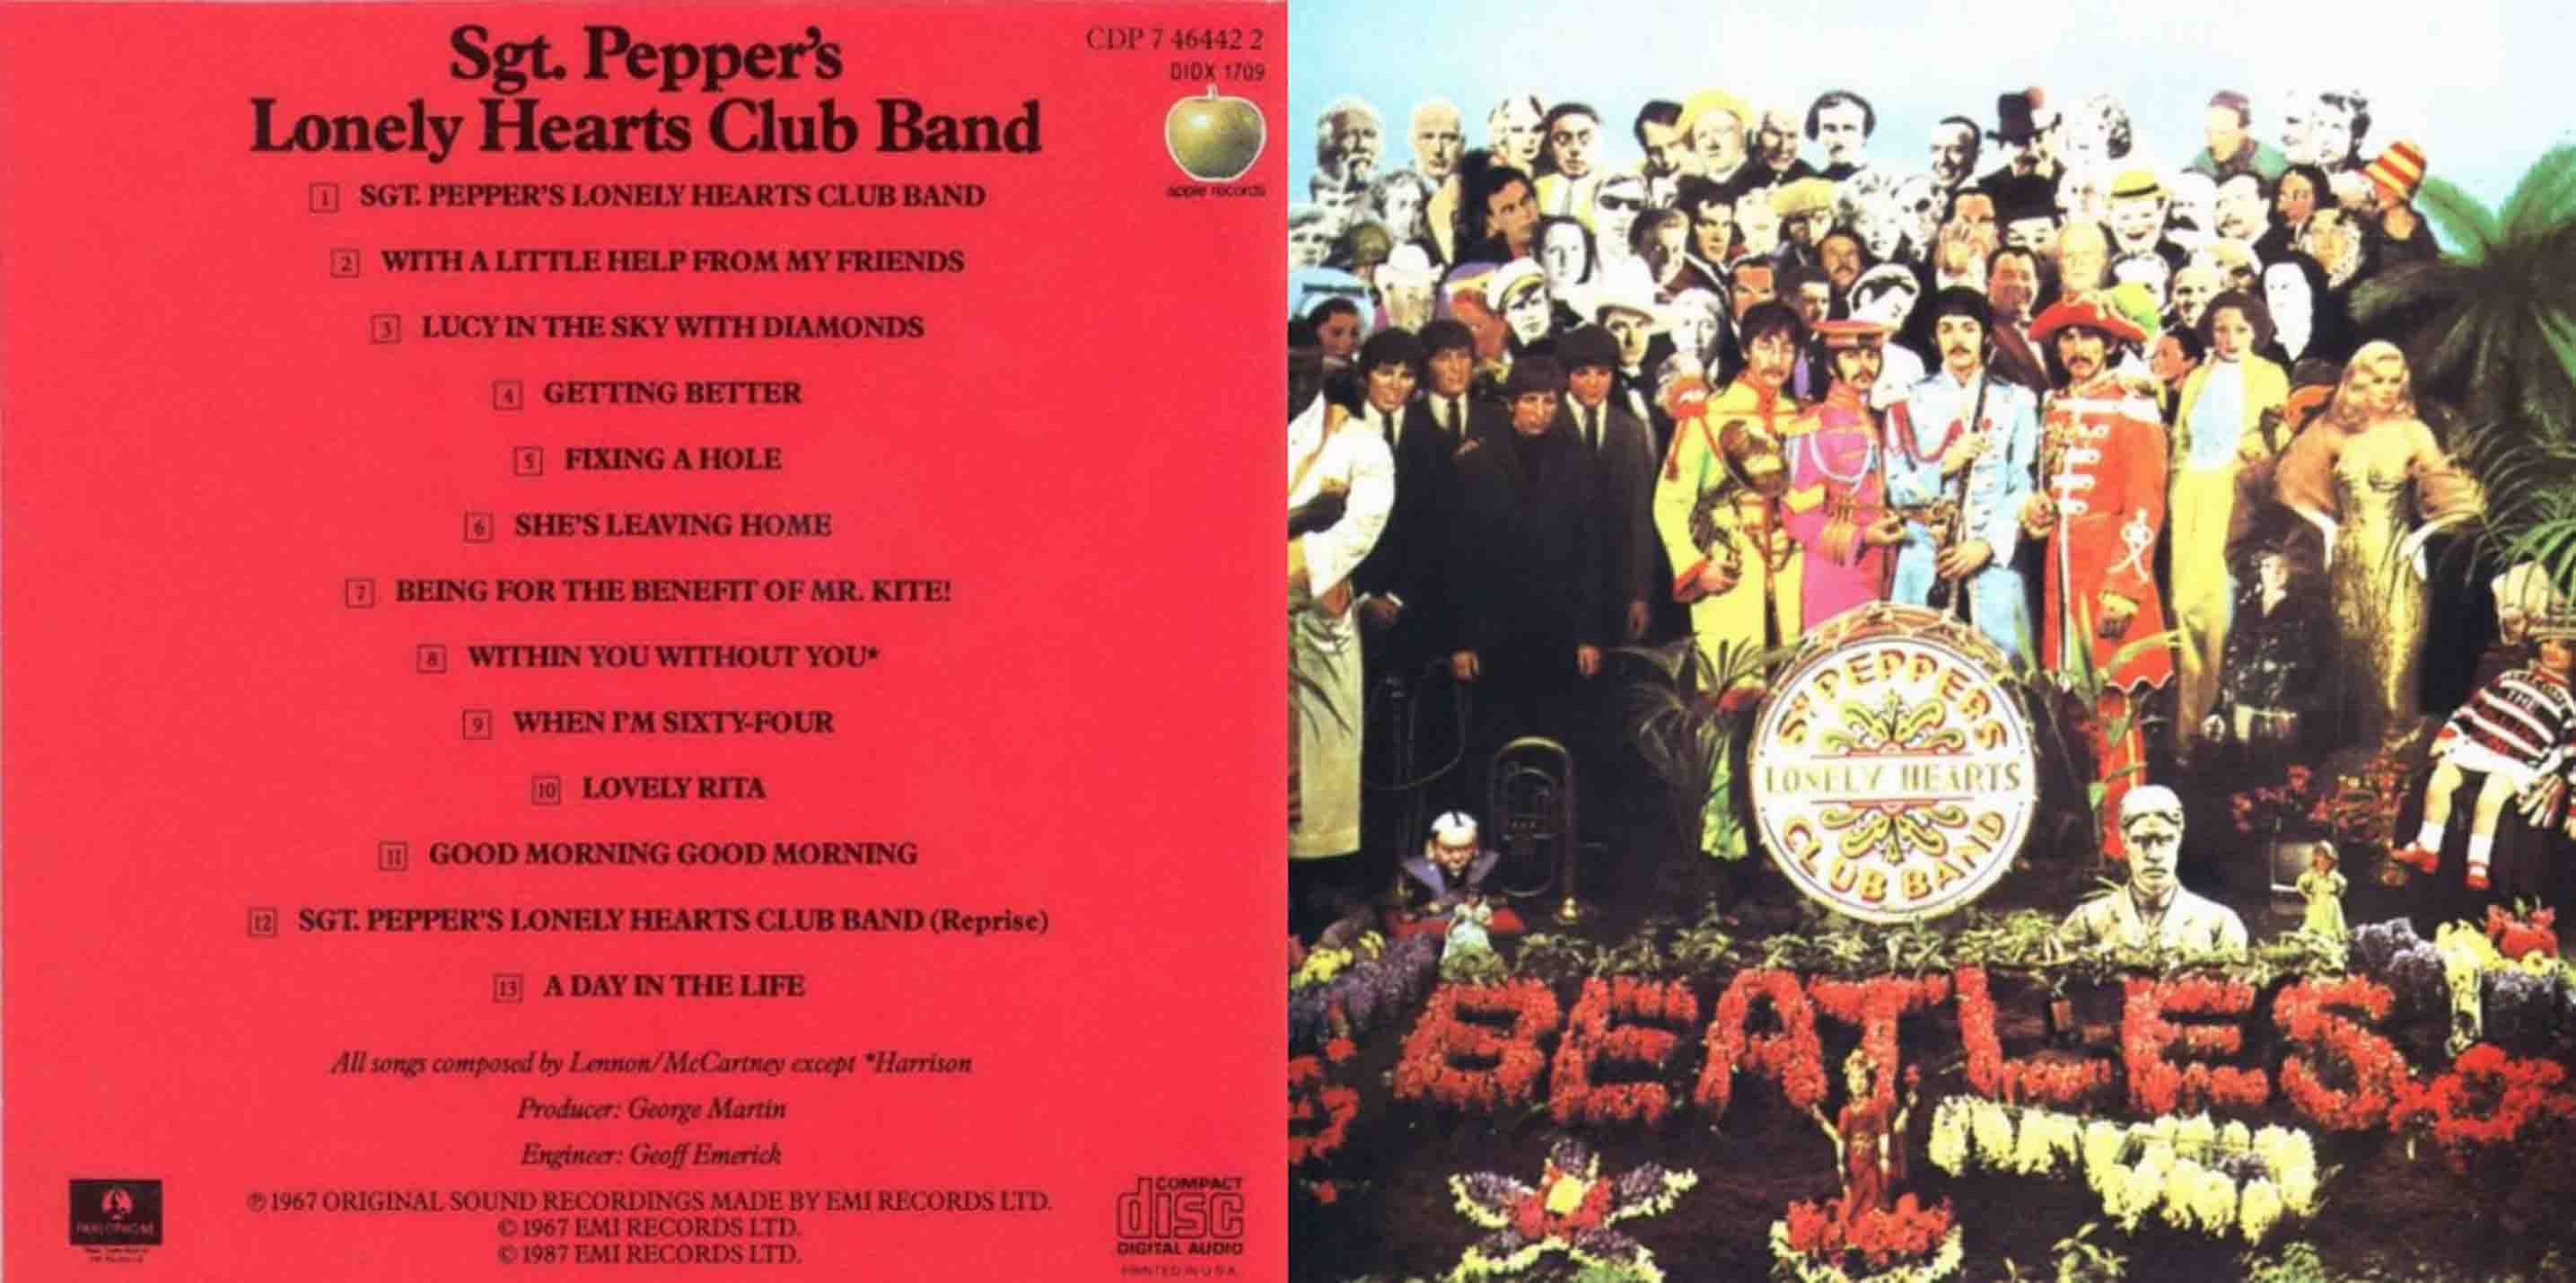 Beatles sgt pepper lonely. Обложке пластинки Sgt. Pepper's Lonely Hearts Club Band (1967 г.).. Sgt. Pepper’s Lonely Hearts Club Band the Beatles. The Beatles Sgt Pepper оркестр 1967. The Beatles Sgt Pepper студия 1967.